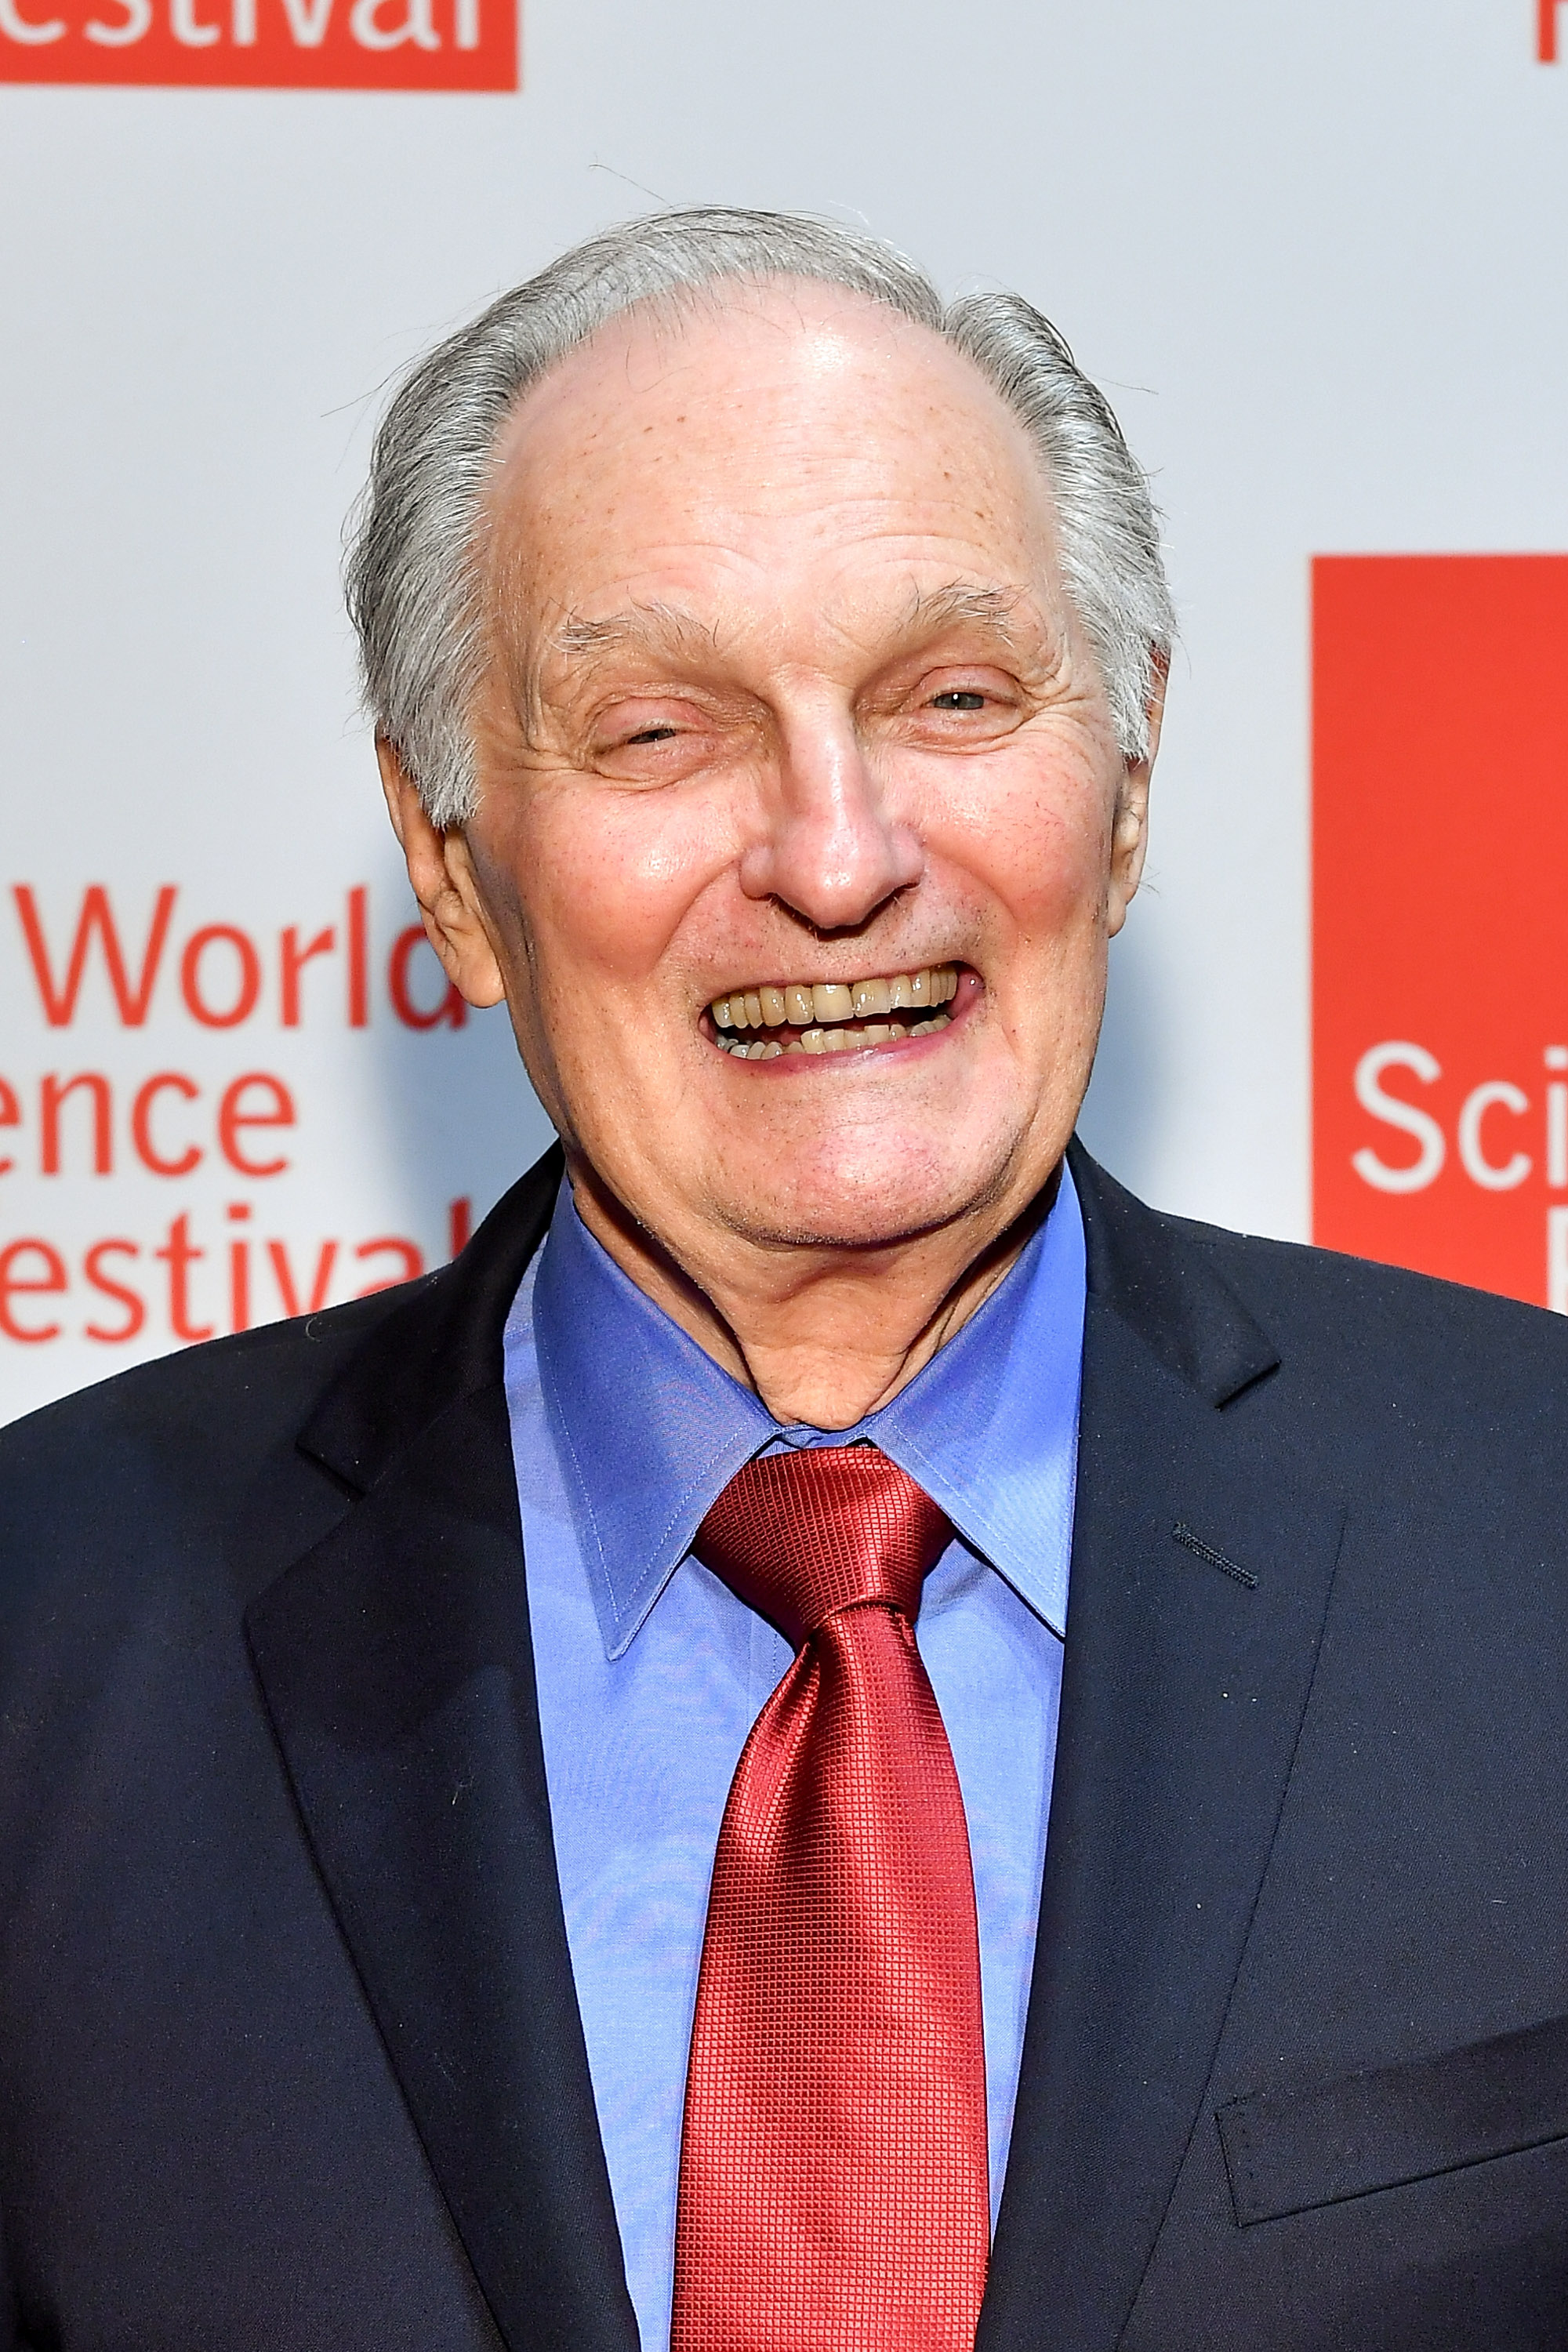 M*A*S*H Actor, Writer Alan Alda to Speak at Cornell - The Cornell Daily Sun